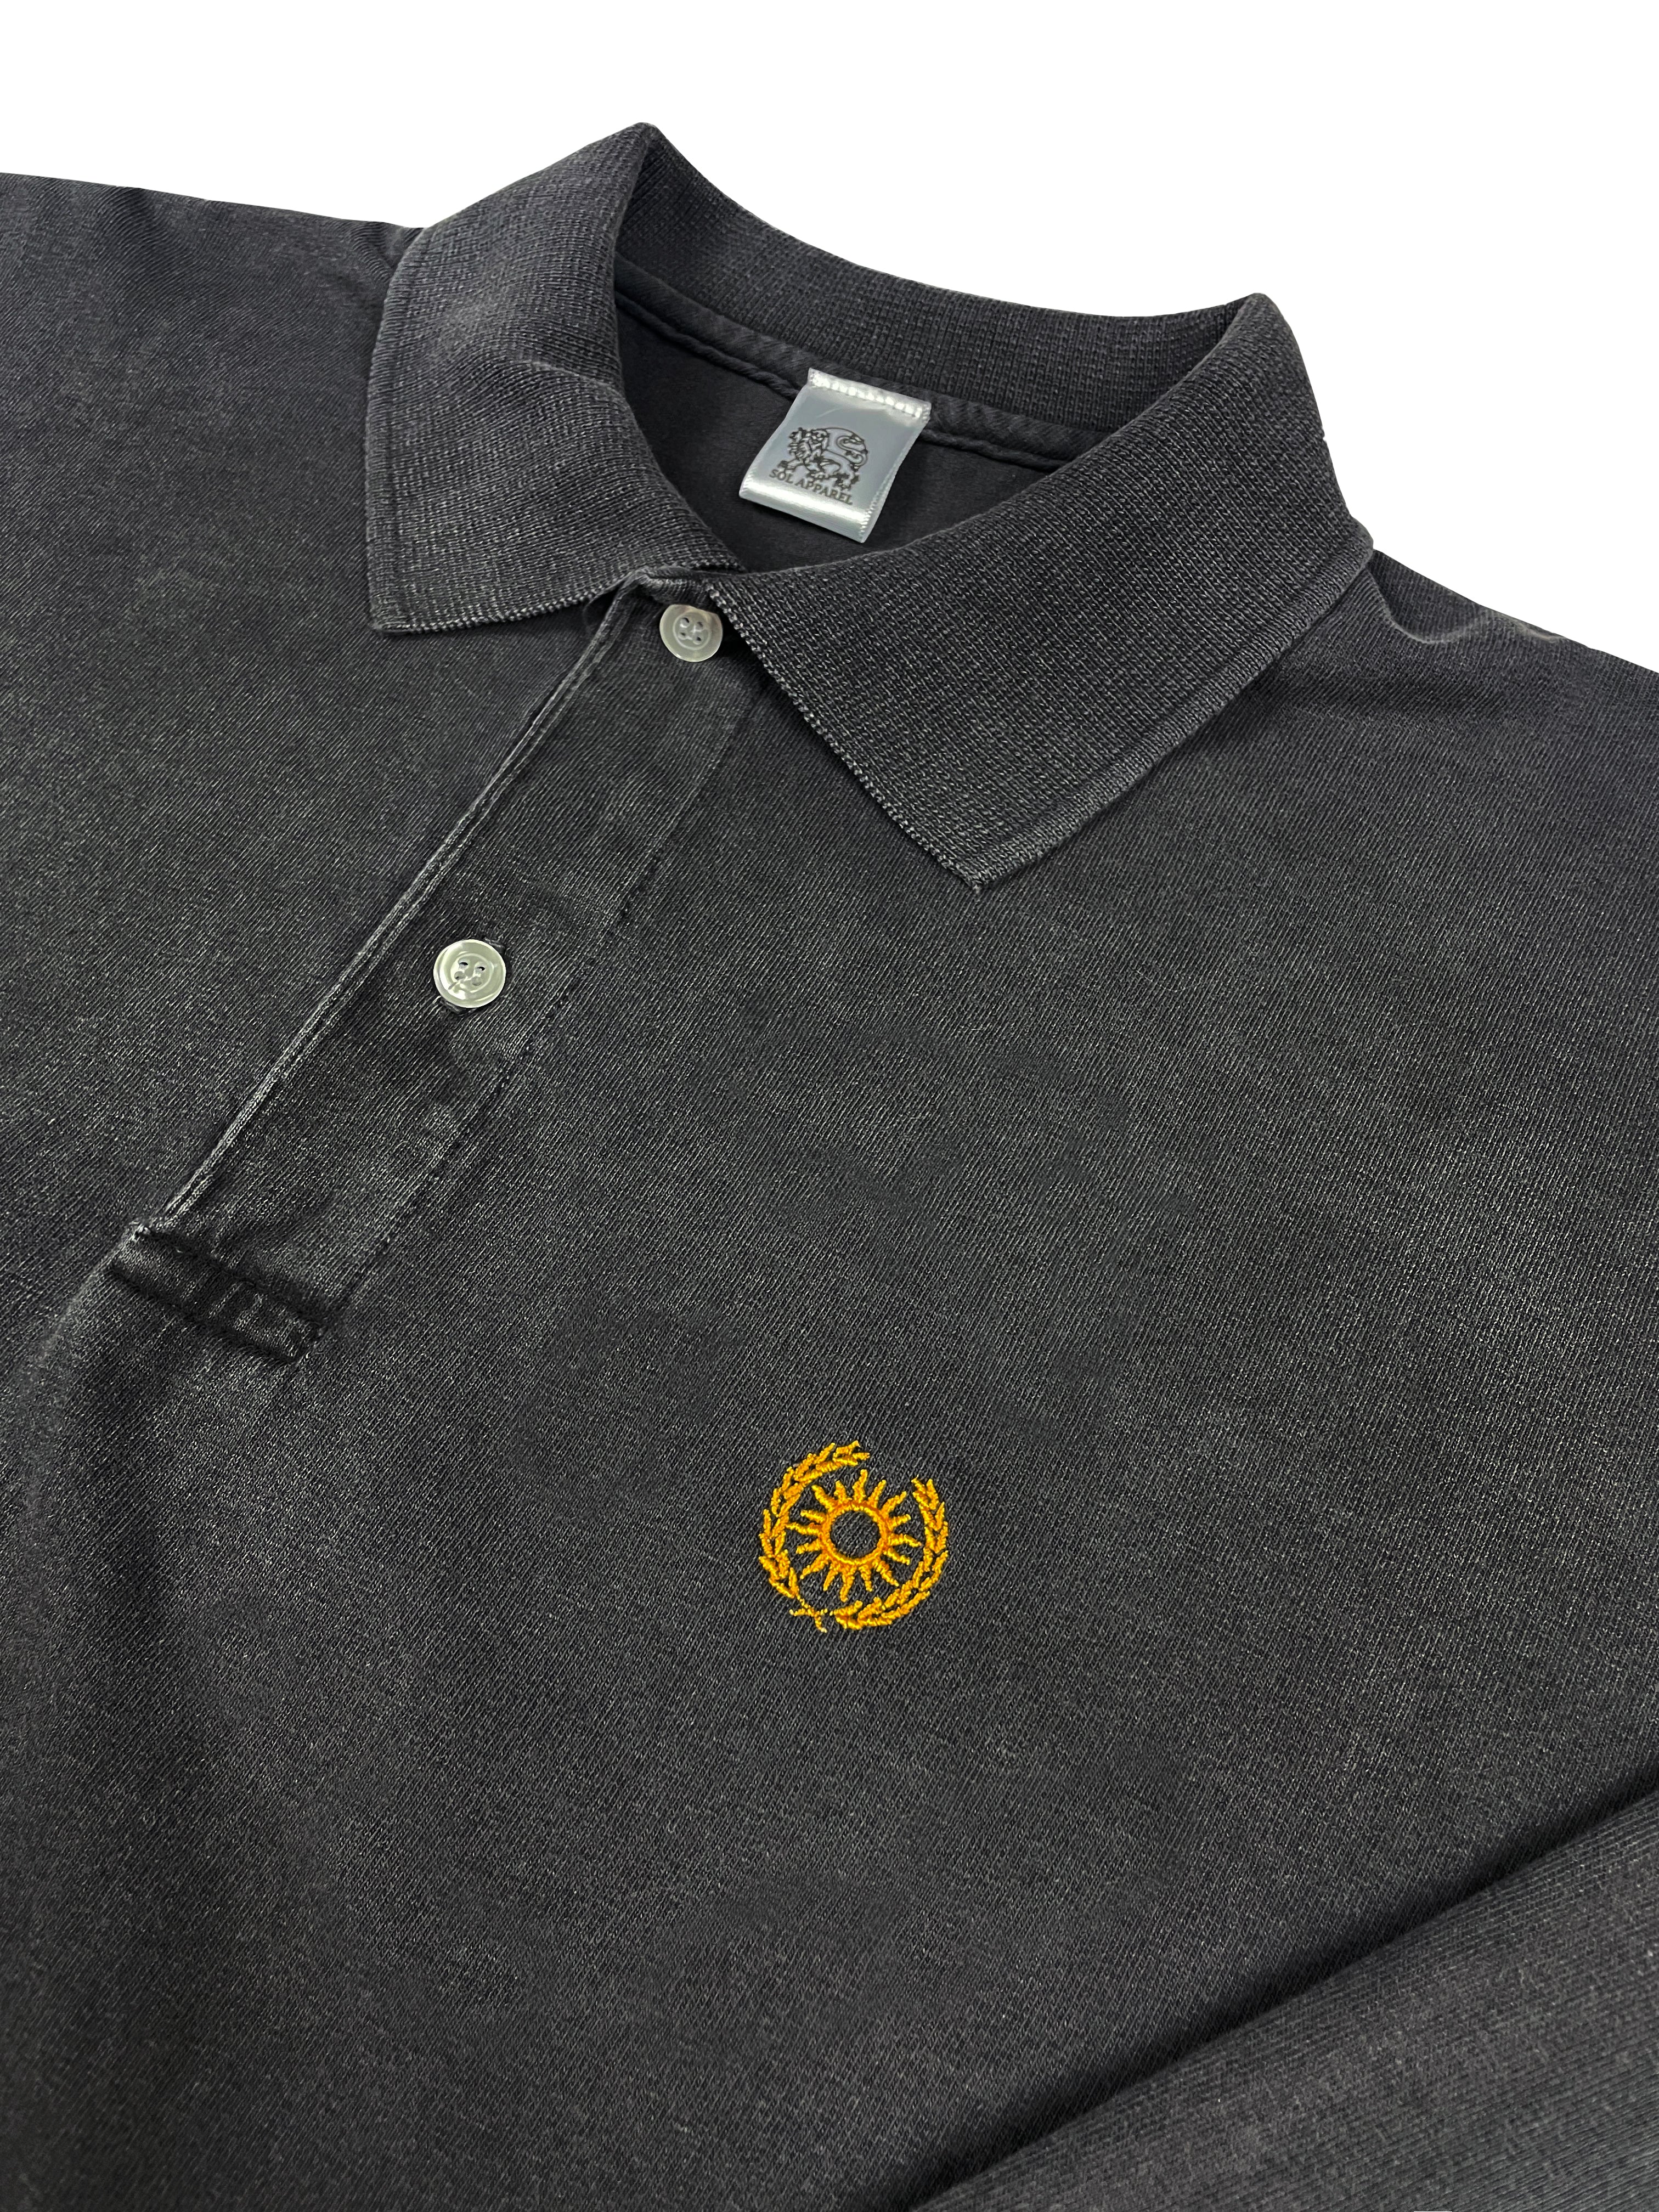 close up of black cotton polo tshirt with a golden sun and laurels embroidered on the left chest